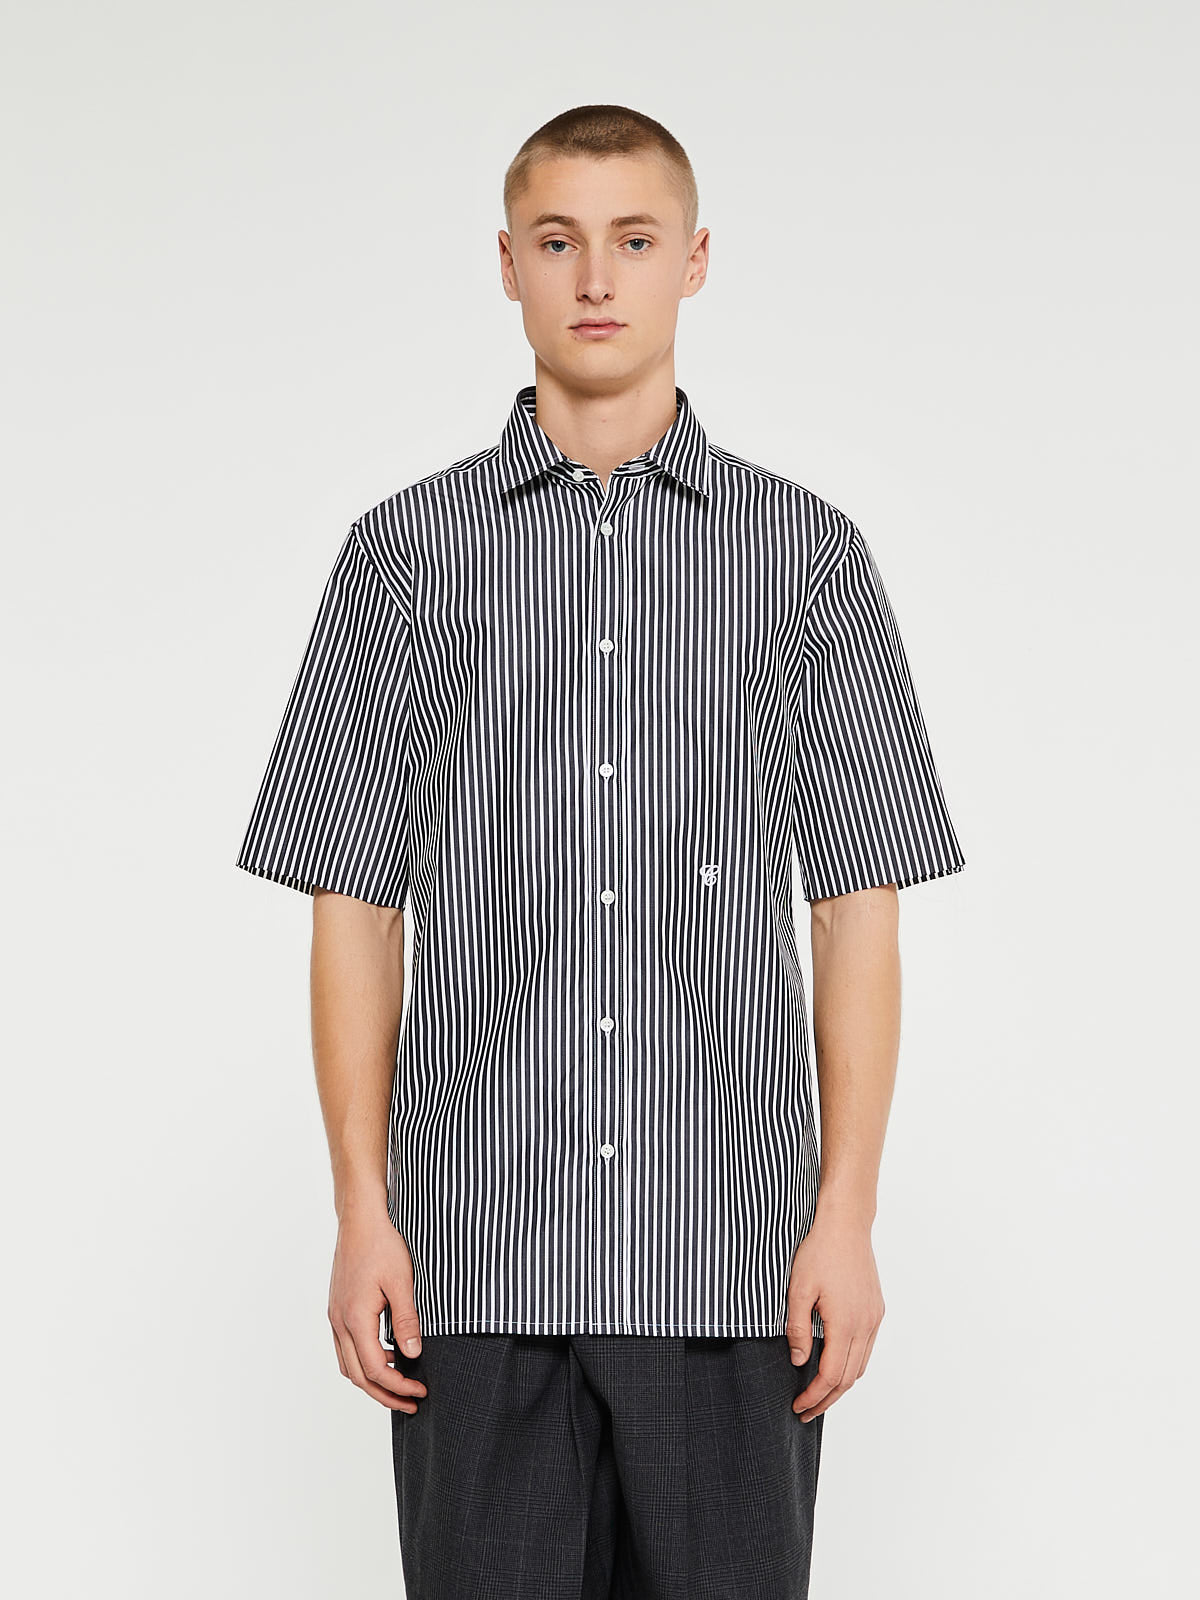 Maison Margiela - C Striped Shirt in Black and White – stoy